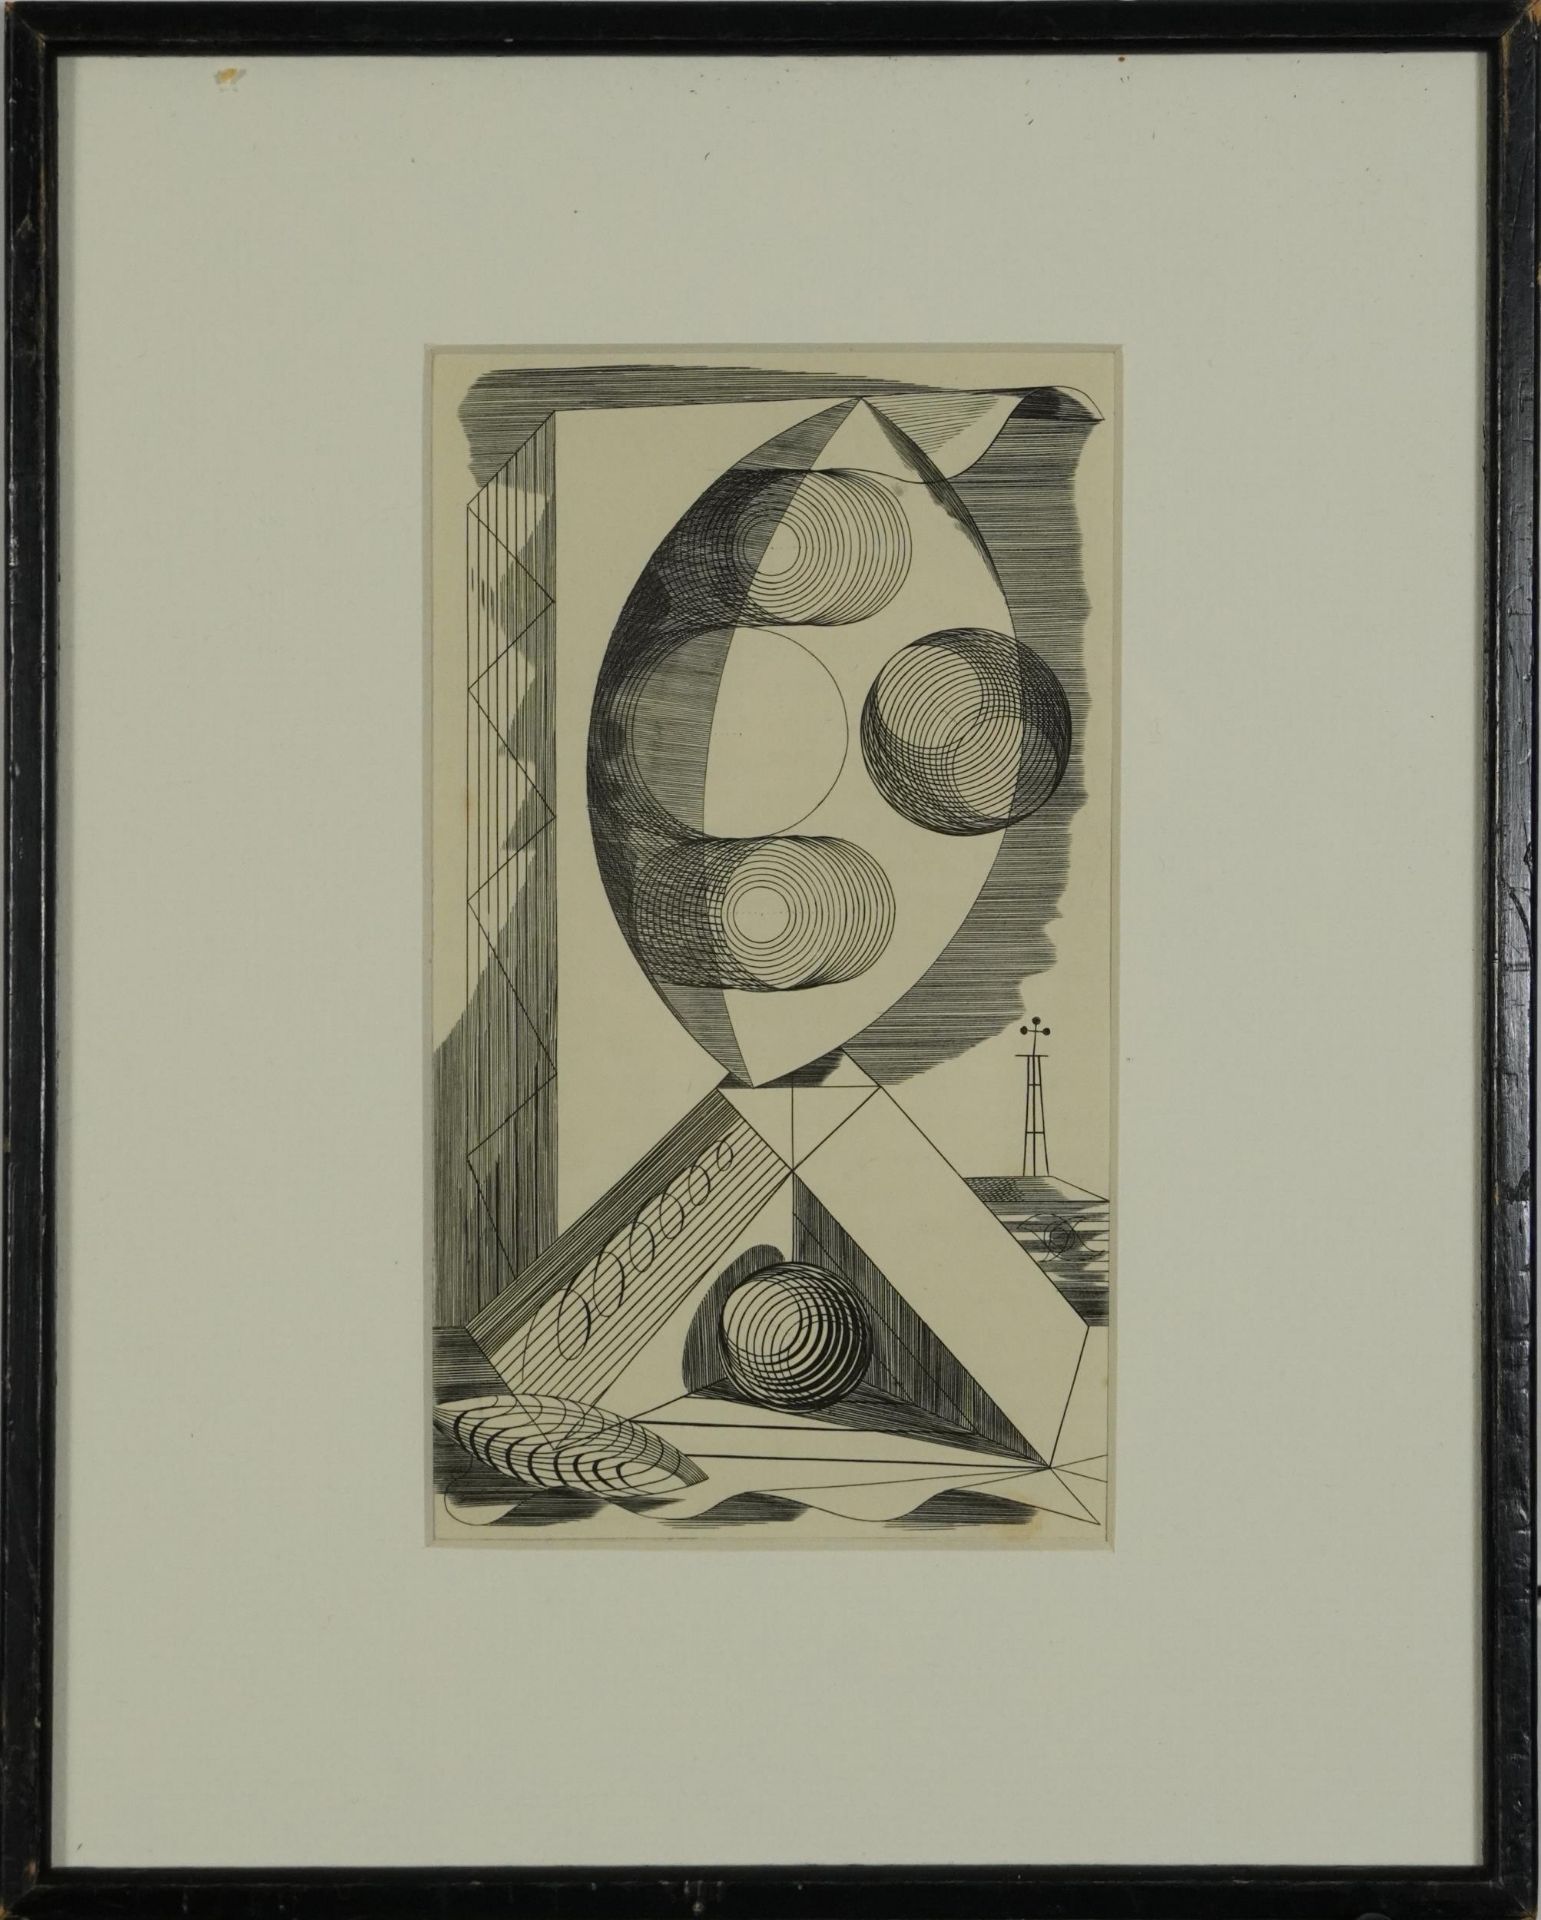 Edward Bawden - Abstract design, copper engraving, various inscriptions verso including Published by - Image 3 of 8